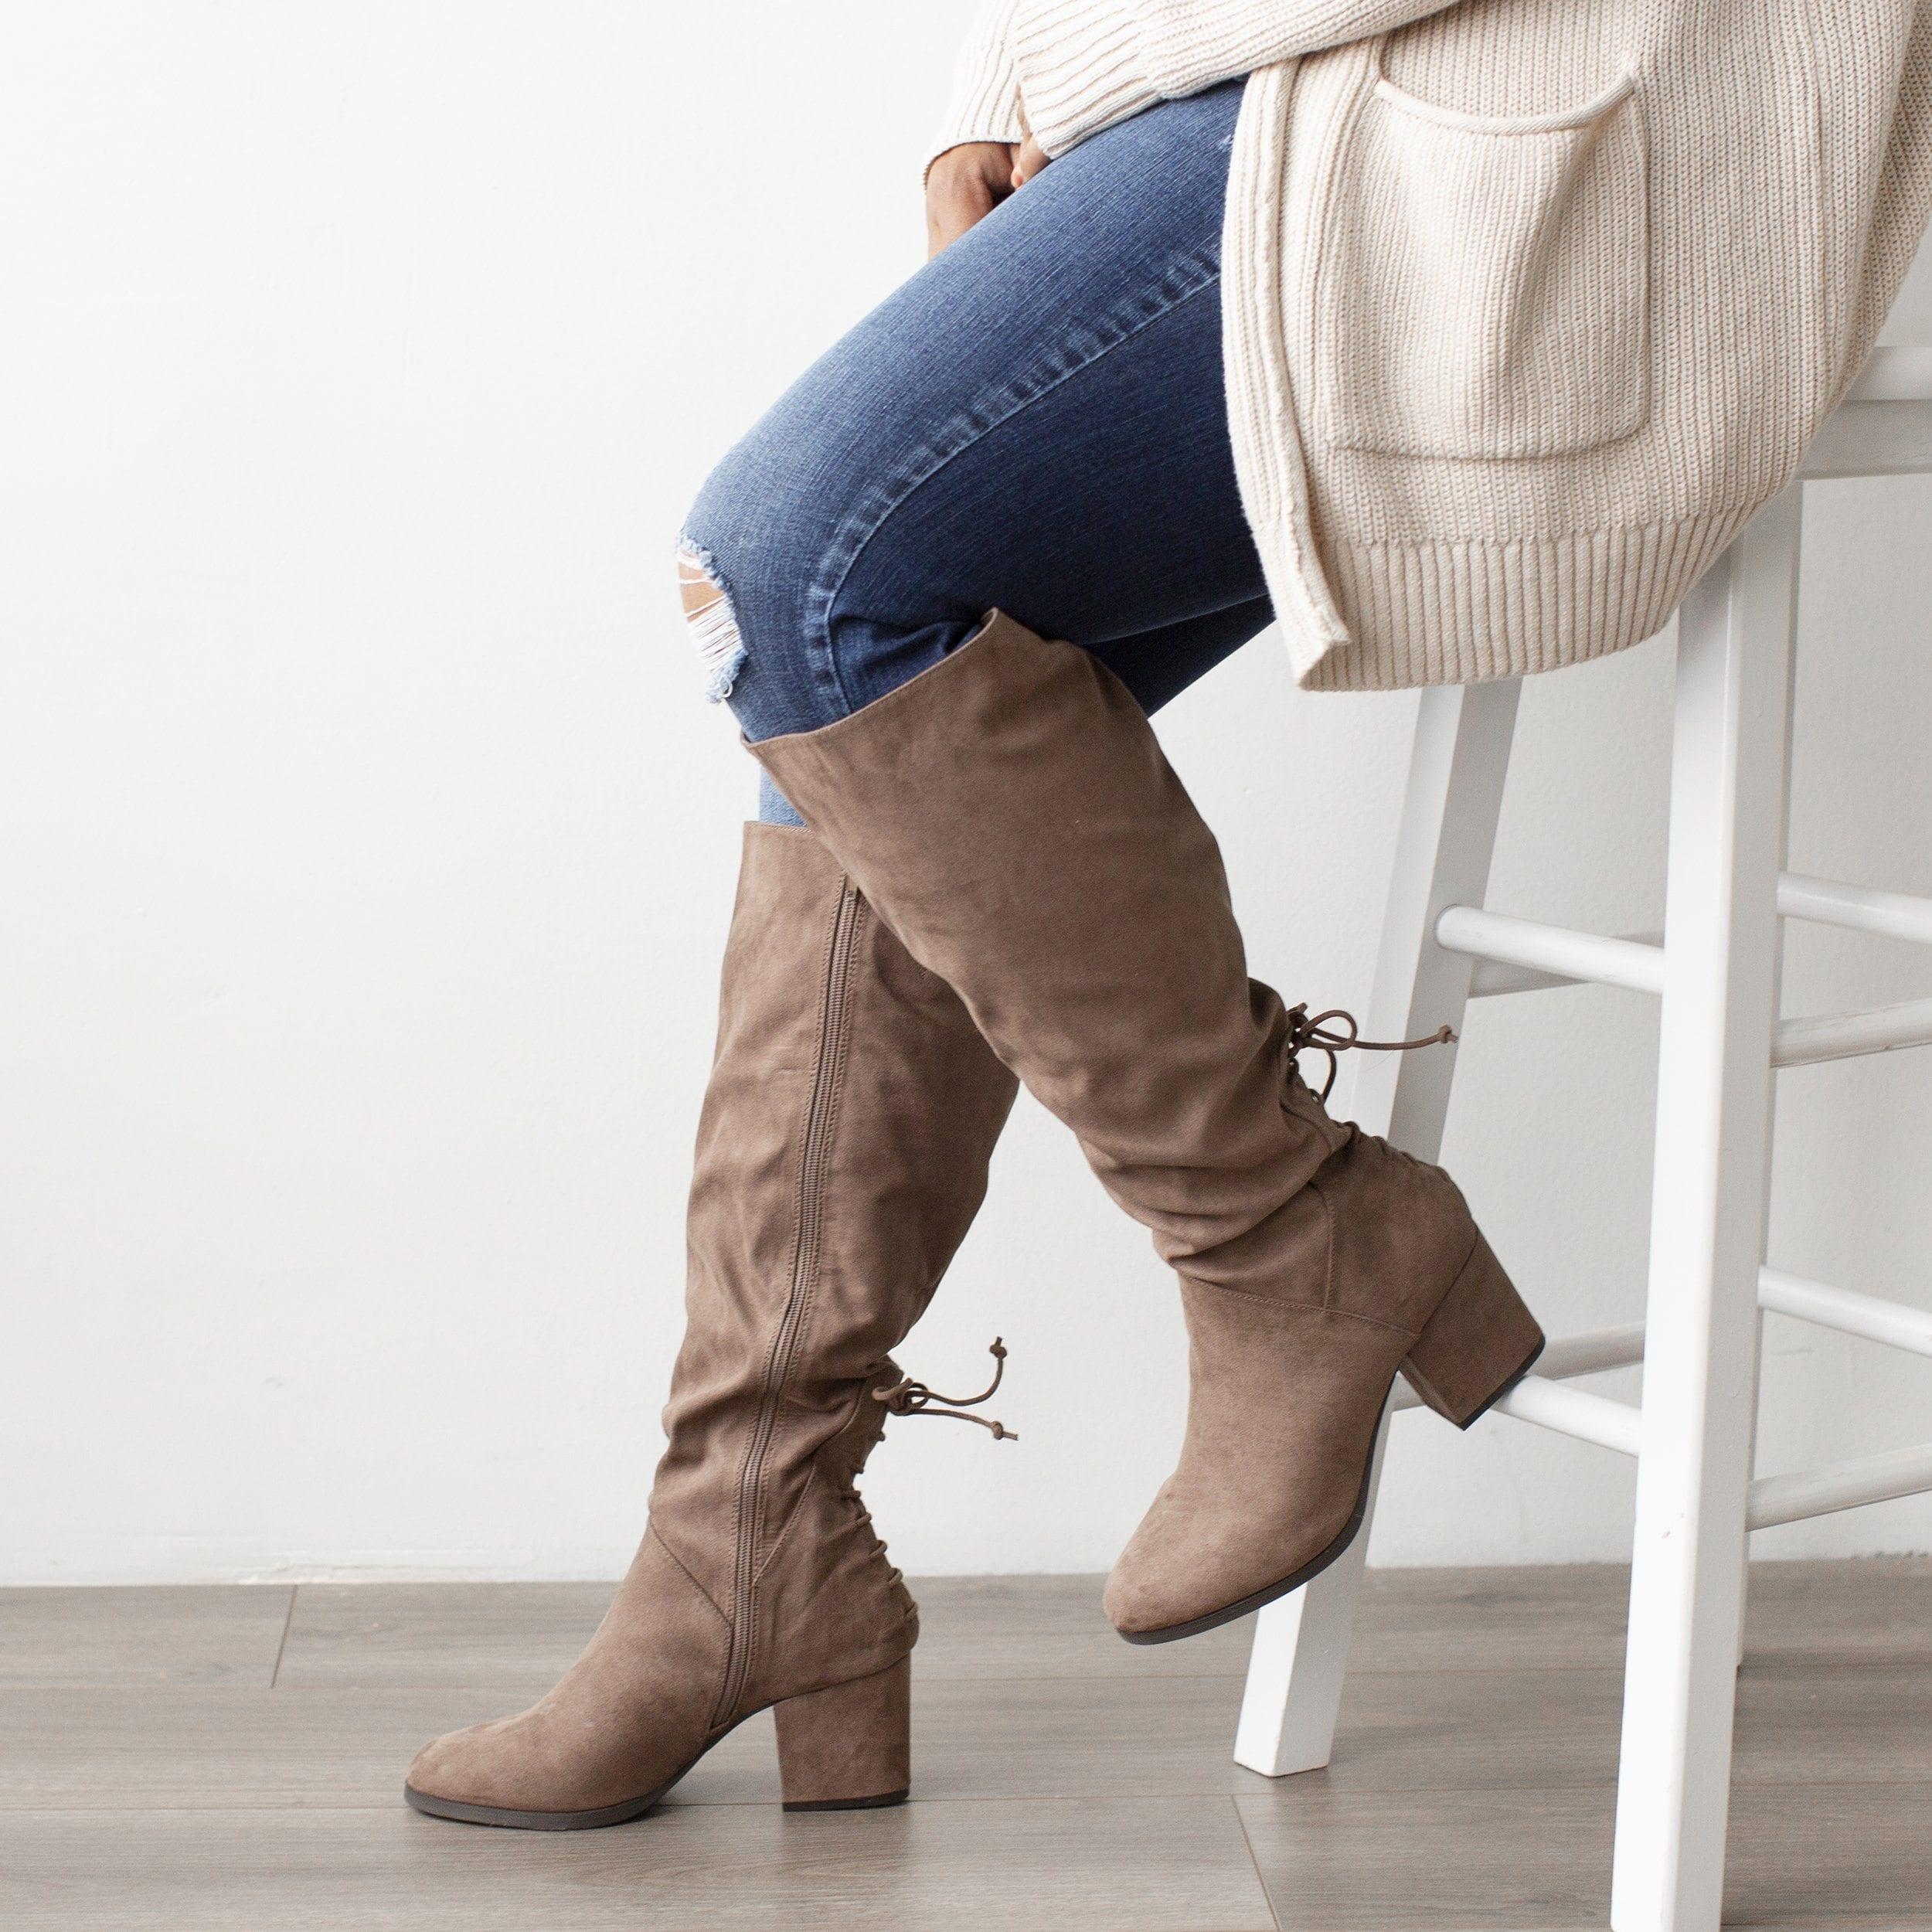 Leeda Wide Calf Boot | Women's Lace Up Boots | Journee Collection